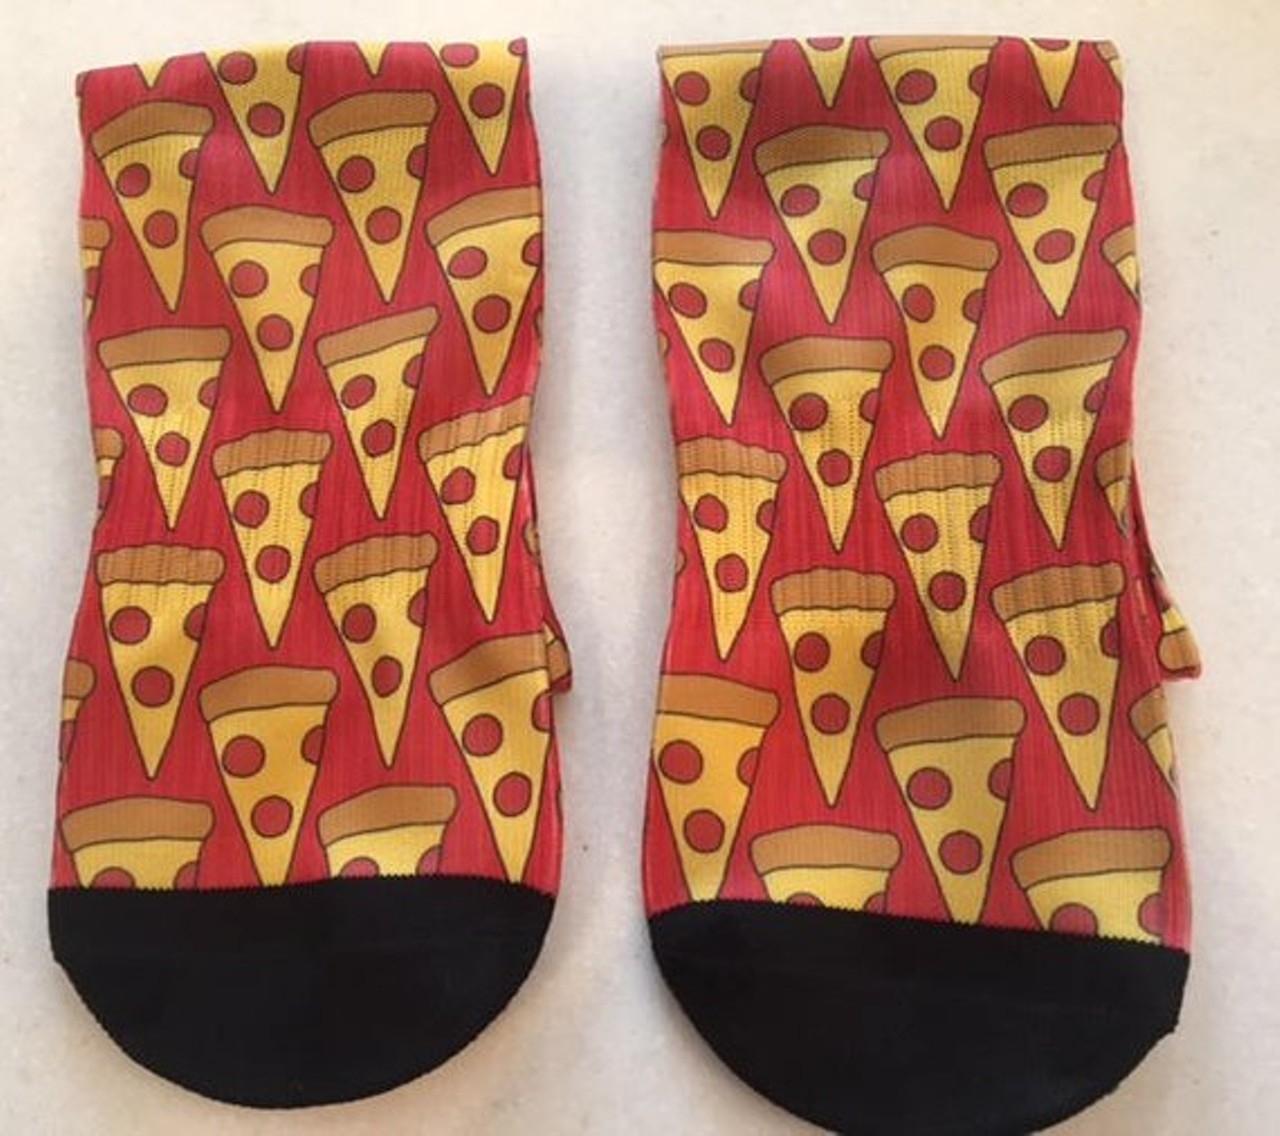  Alex&#146;s Ausome Socks 
Found at: Merchant Mrkt, 24687 Cedar Rd., Lyndhurst
Cost: $14.95
Alex's Ausome Socks company not only make socks that are perfect for the holiday season, but with a purchase you are giving hope to young kids diagnosed with autism. Alex&#146;s mom told Scene that he loves pizza and these socks are a great gift for the significant others and kids who also love some pie.